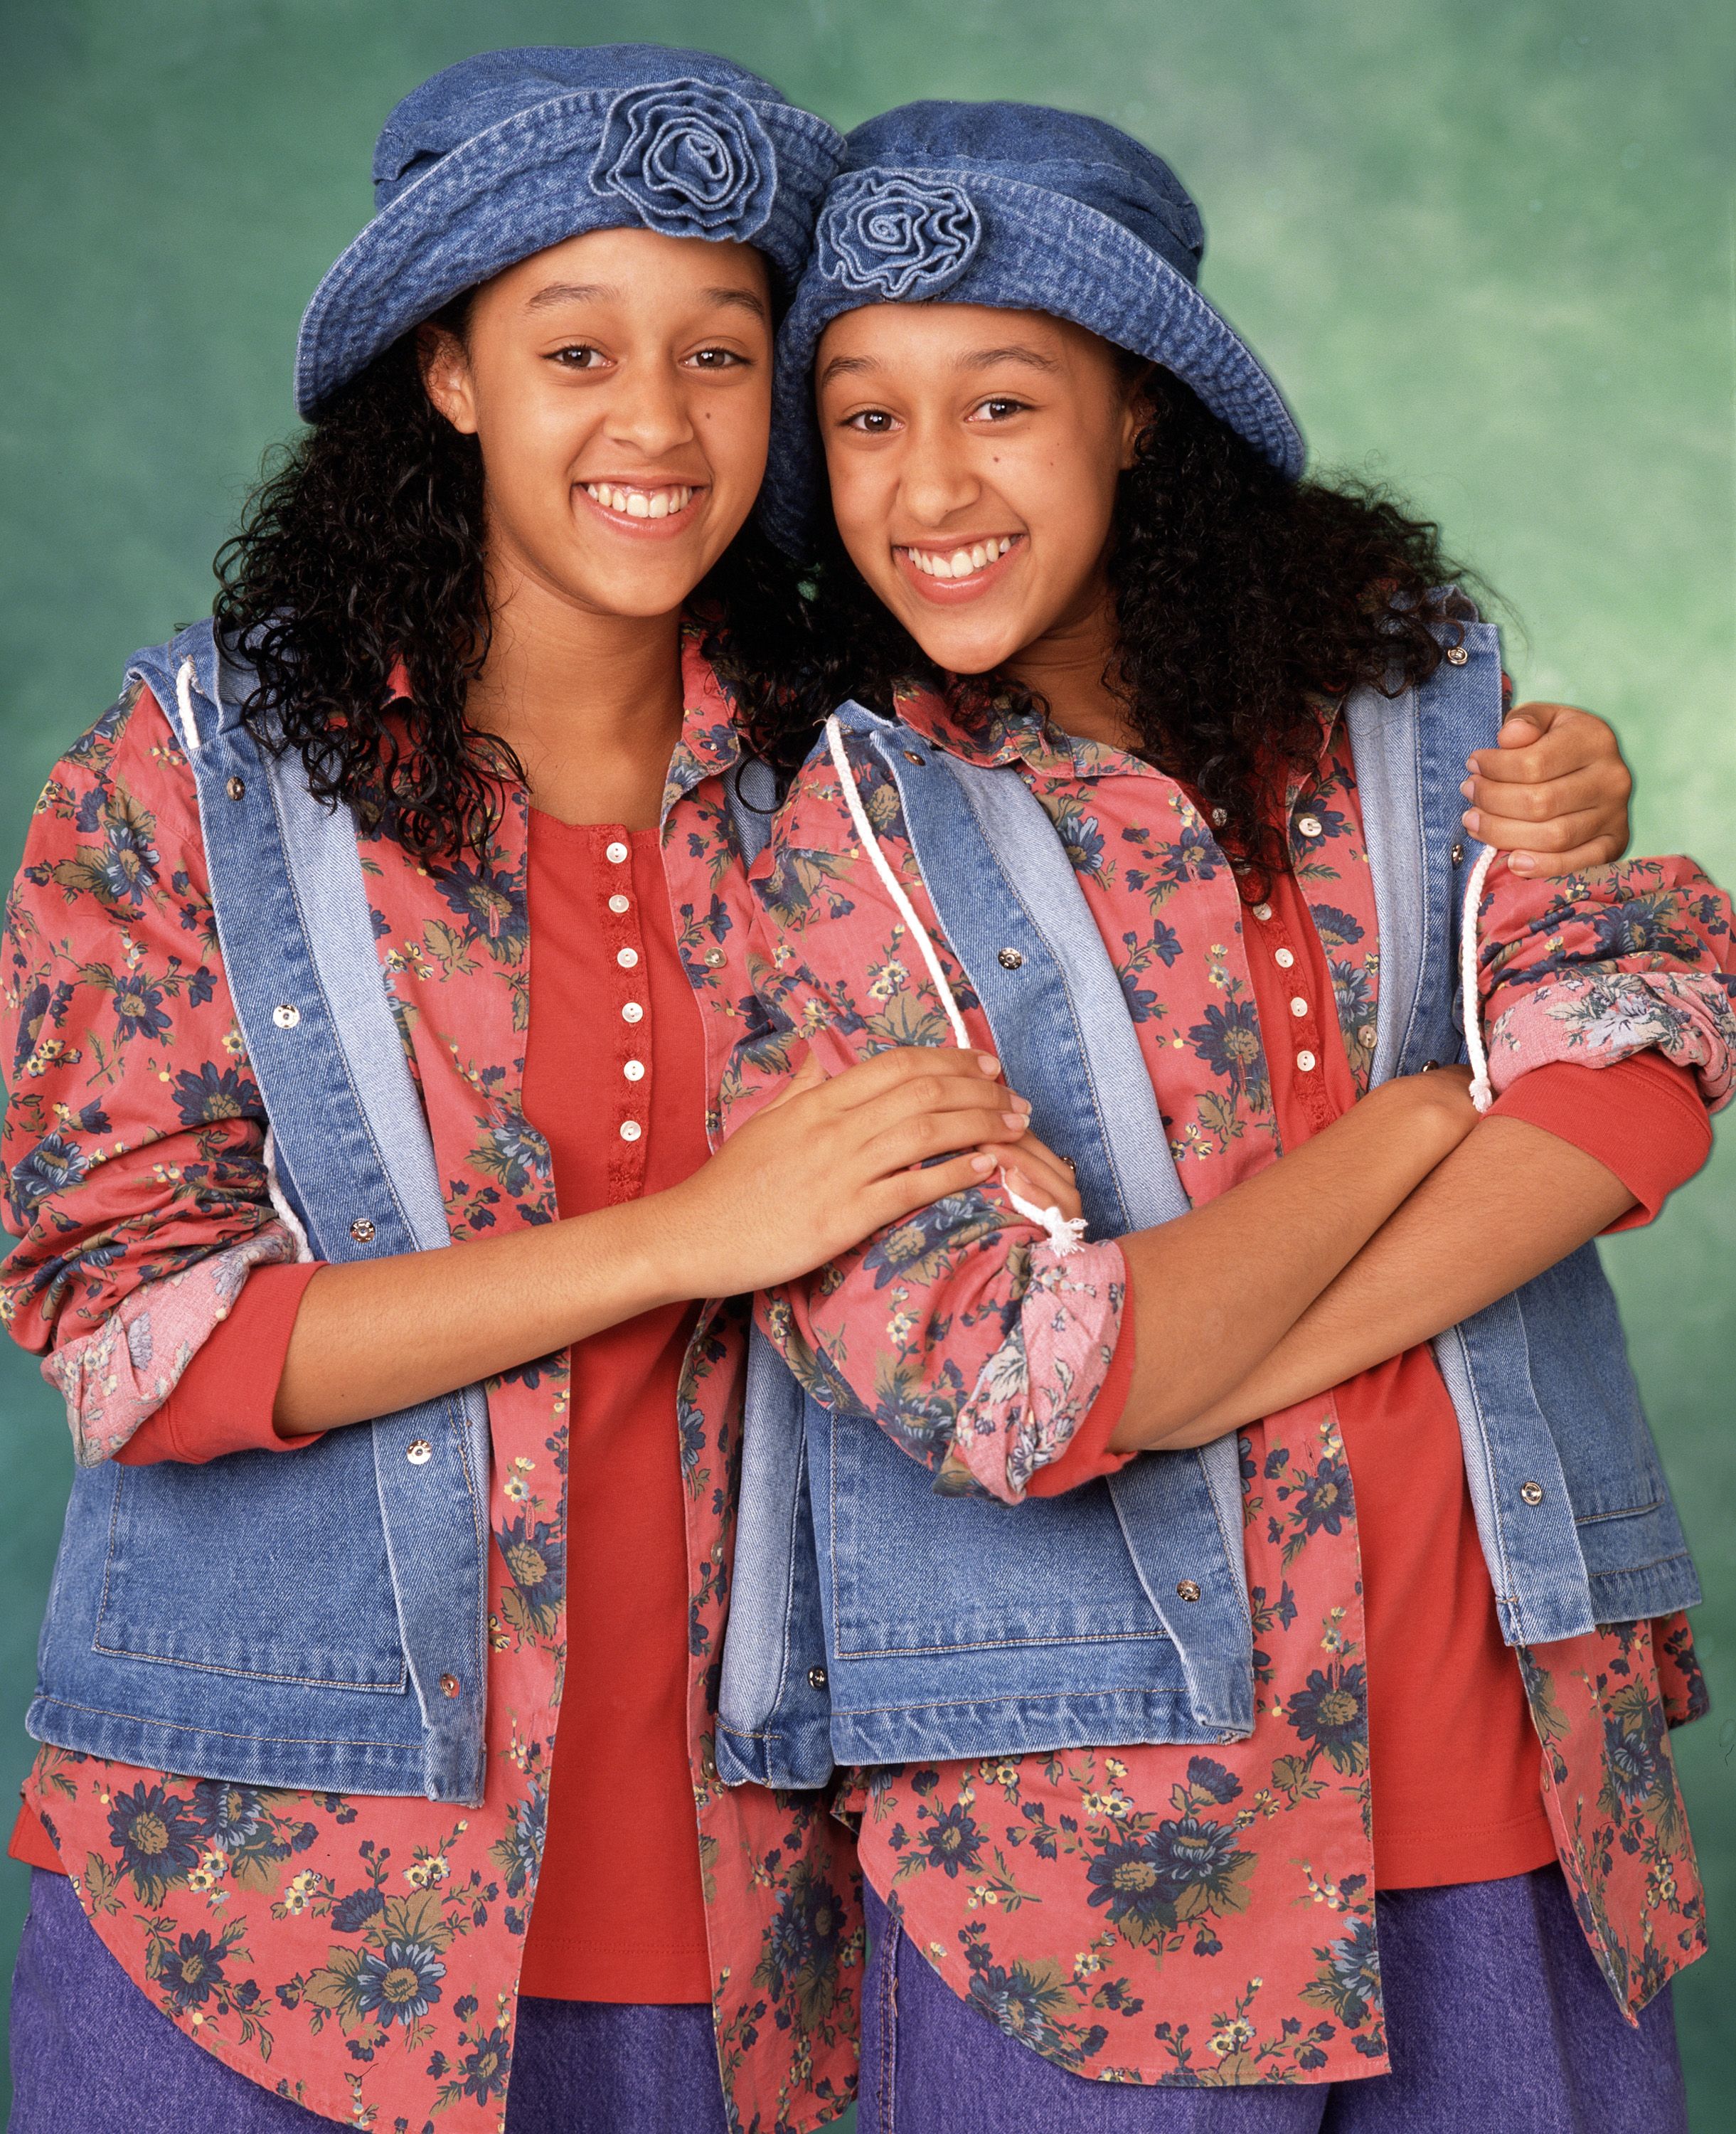 Tia Mowry and Tamera Mowry on the set of "Sister Sister" season one. | Photo: Getty Images